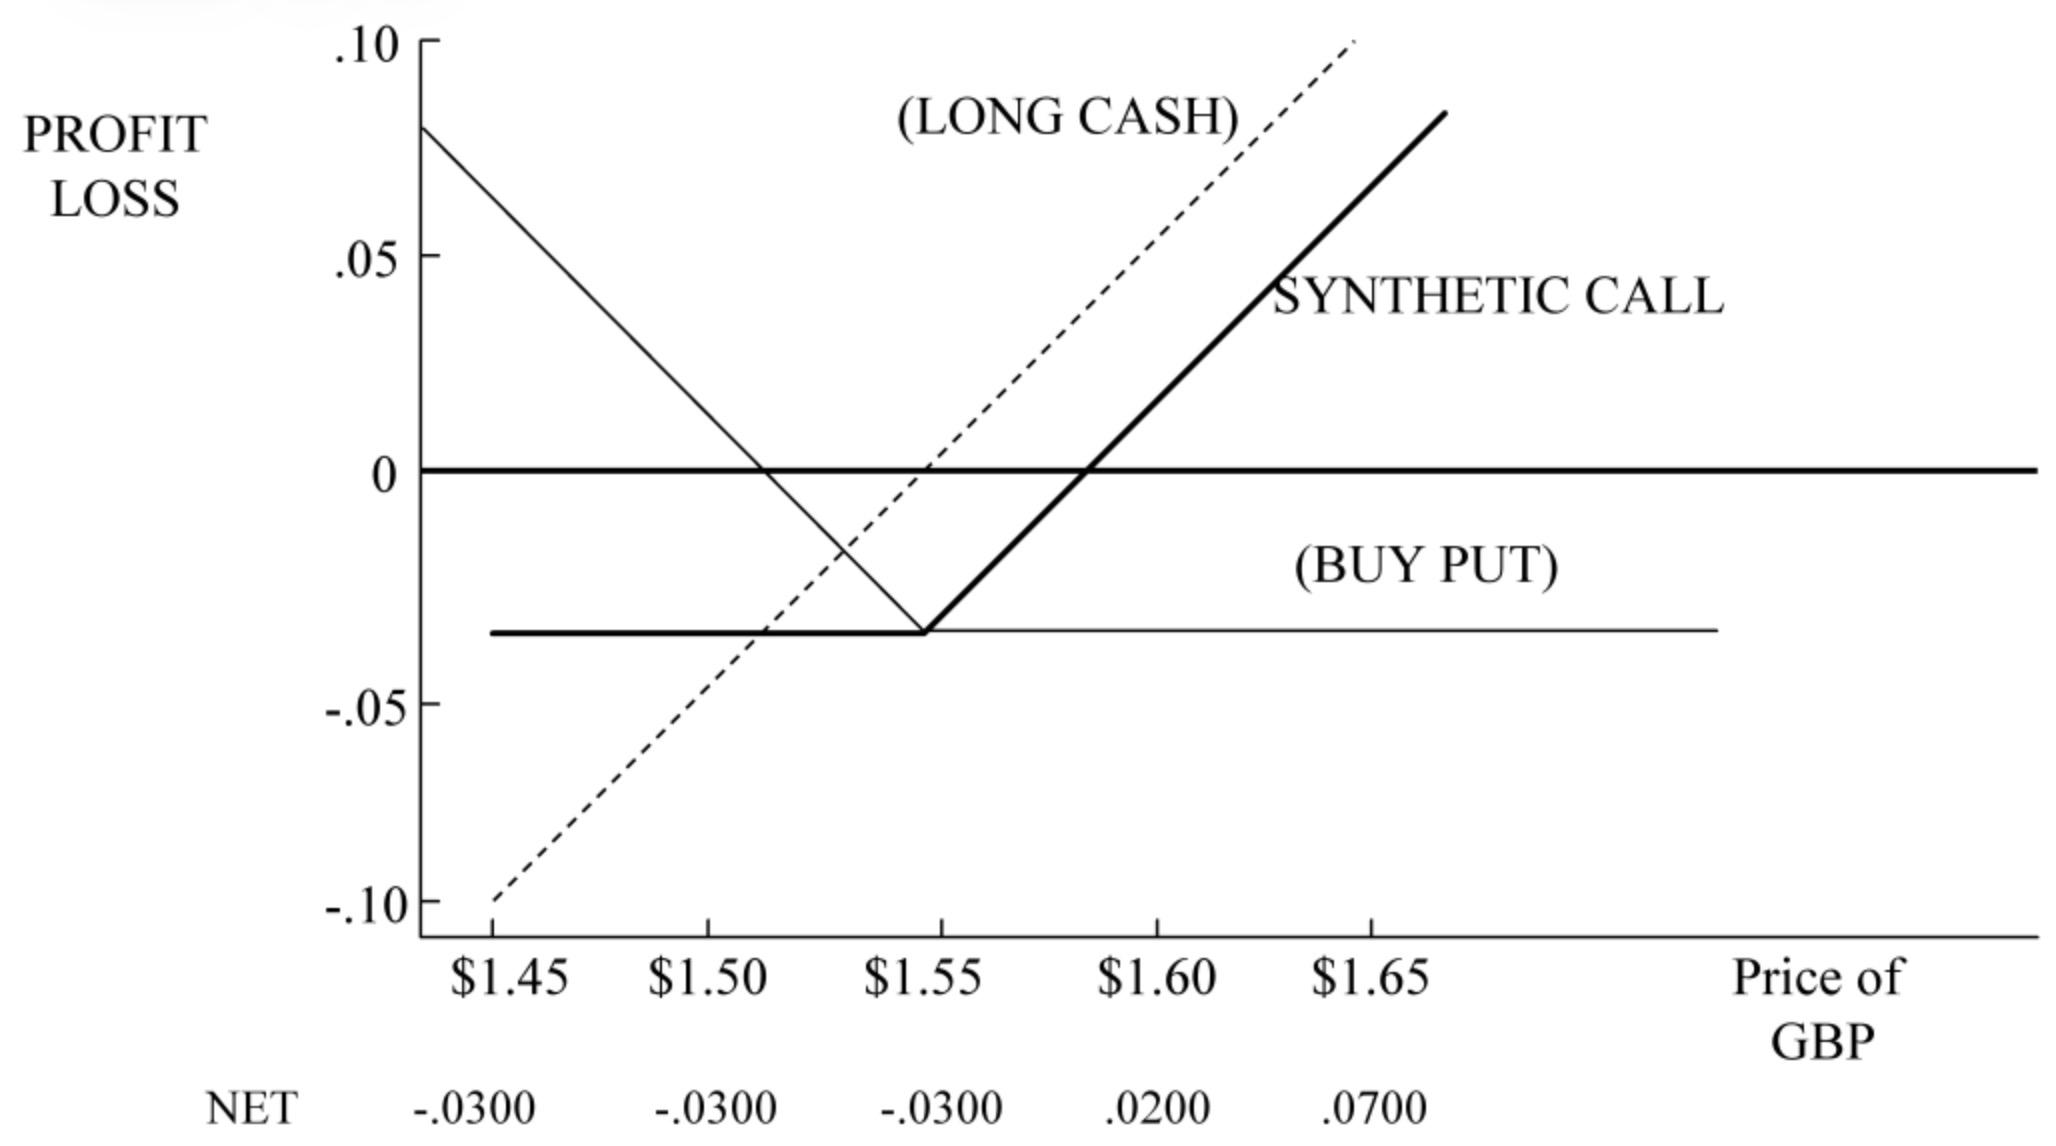 Buy ATM Call Net Position Image